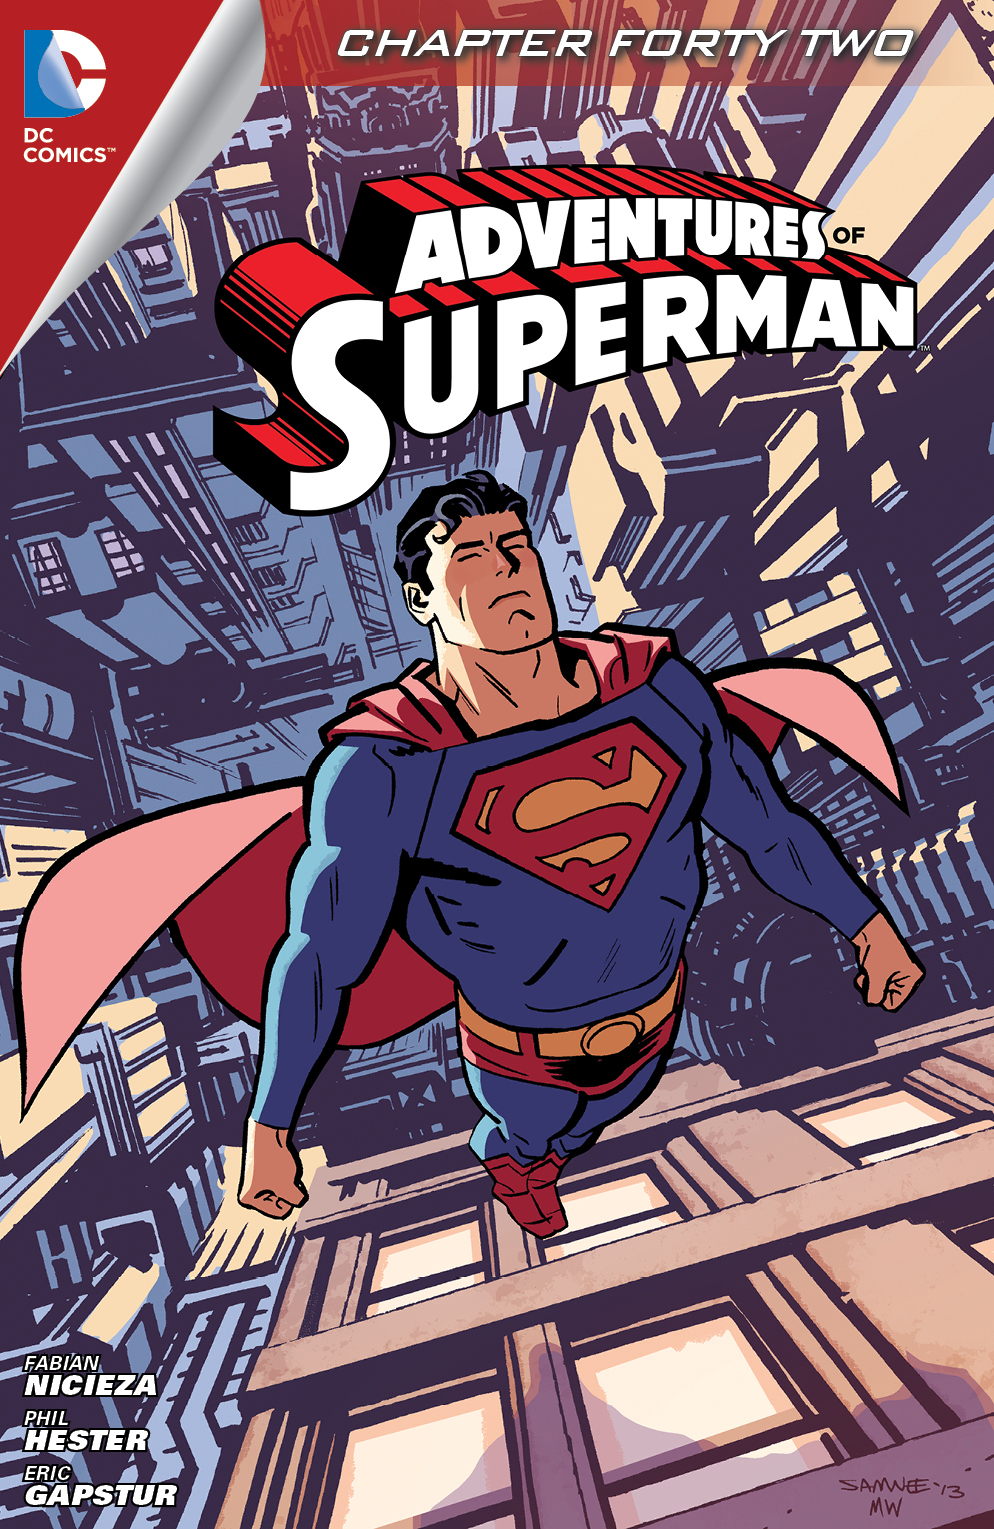 Adventures of Superman (2013-) #42 preview images